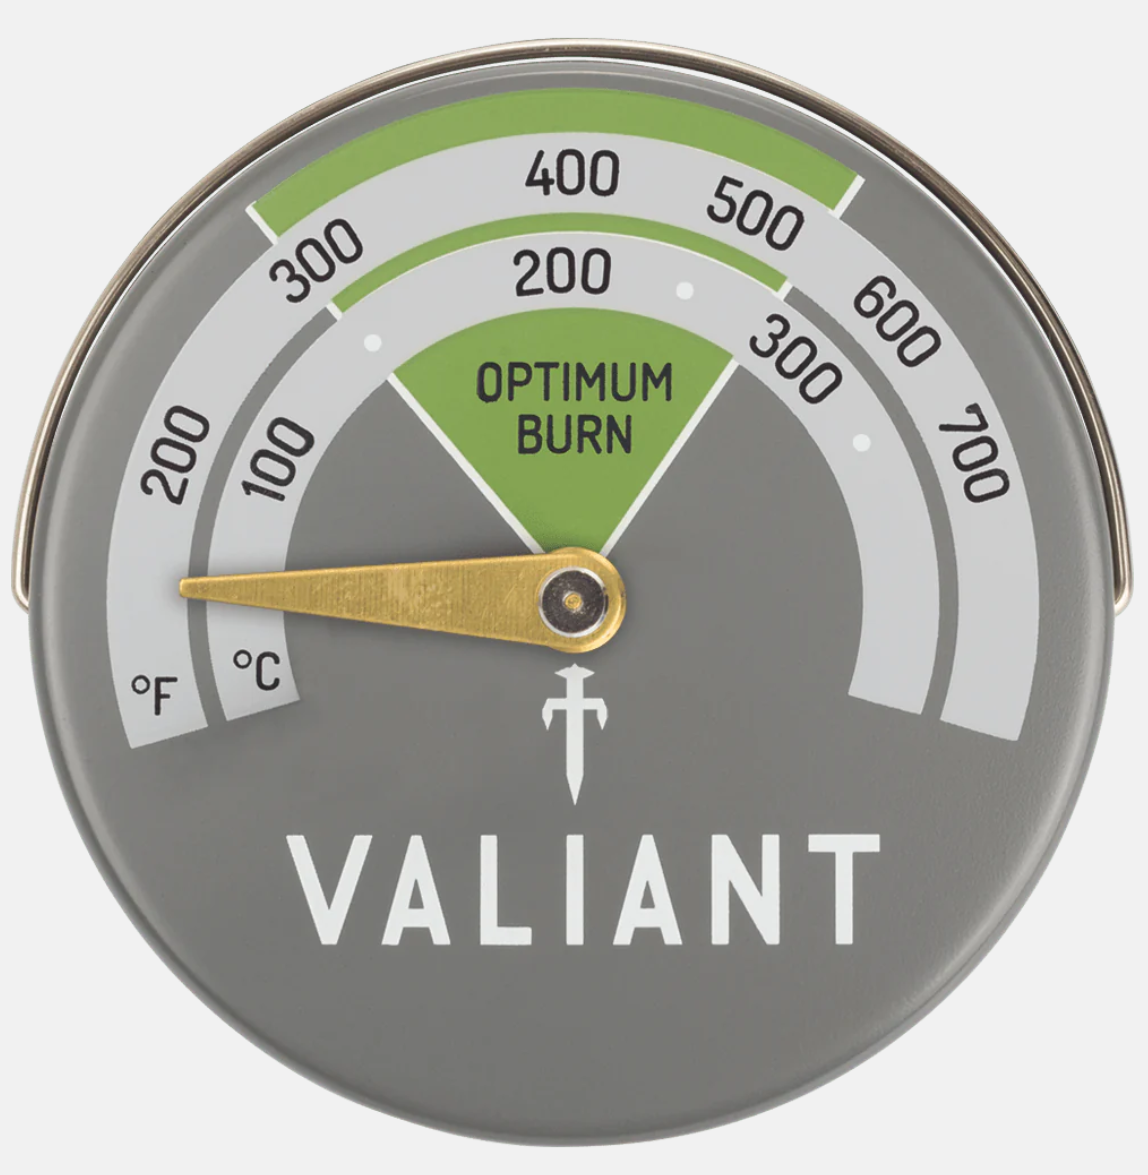 the Valiant Stove Thermometer